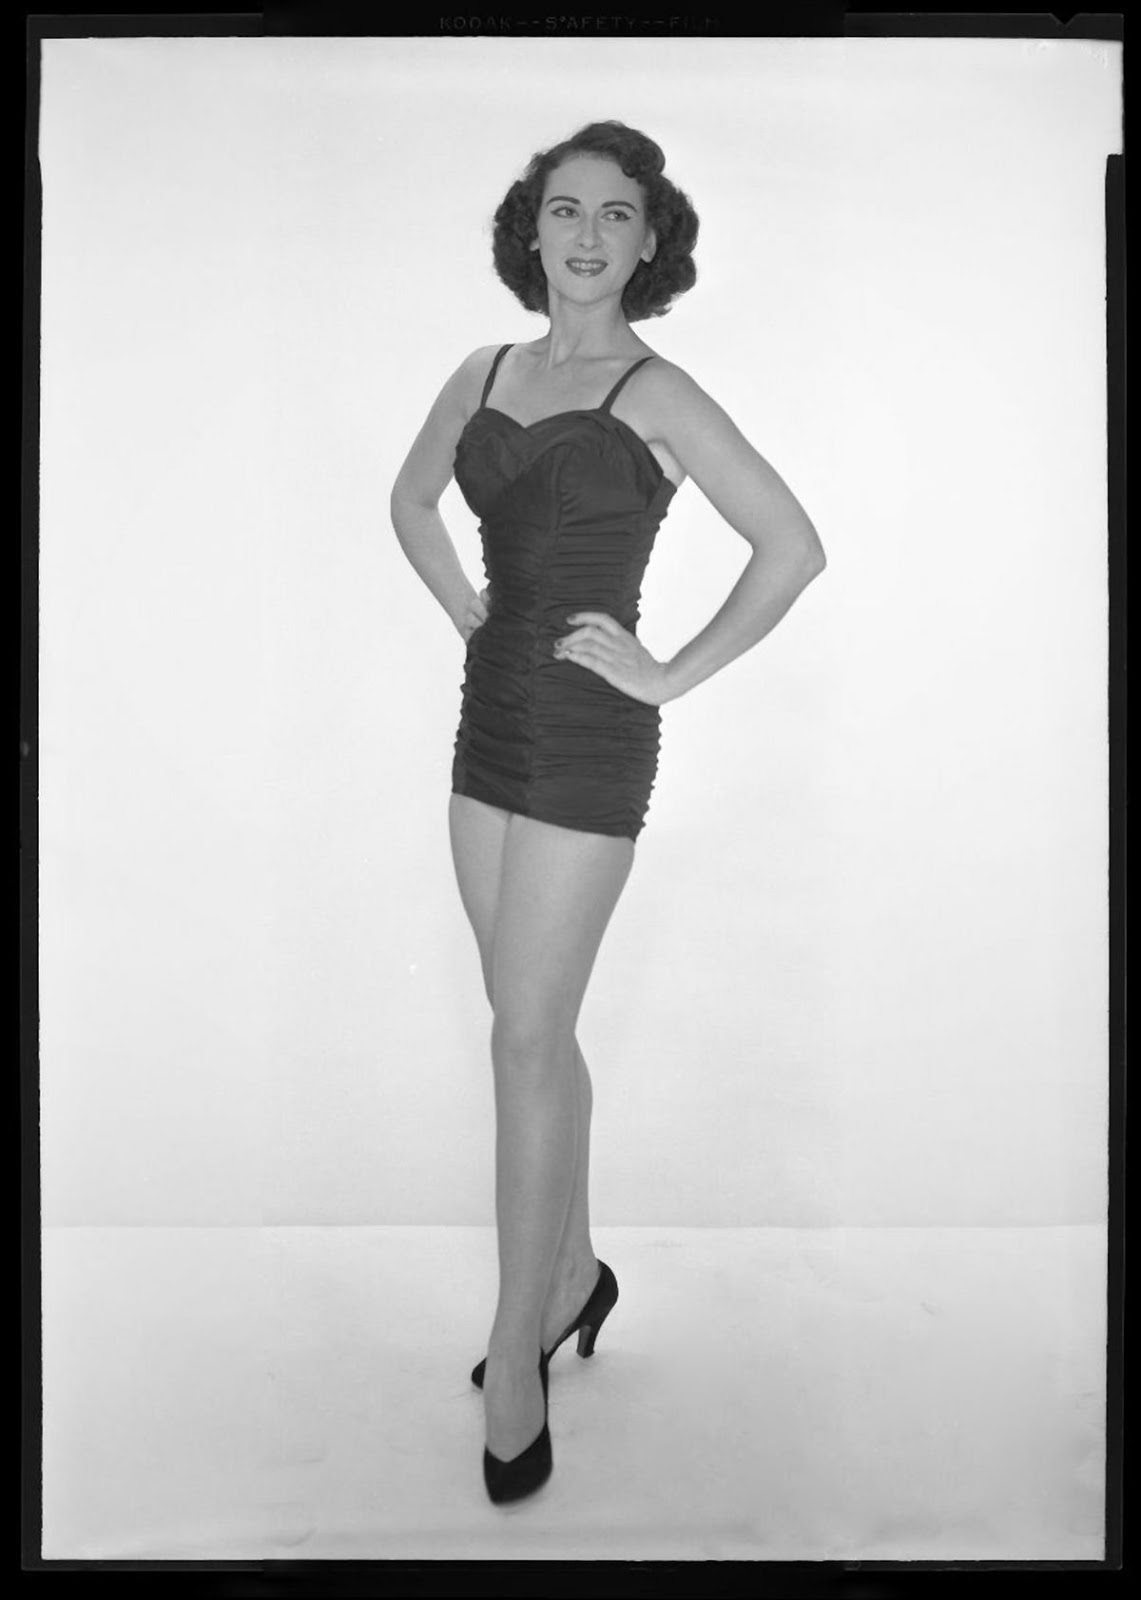 19 Fascinating Vintage Studio Photos of Women in Their Super Sexy '50s Swimsuits ~ Vintage Everyday